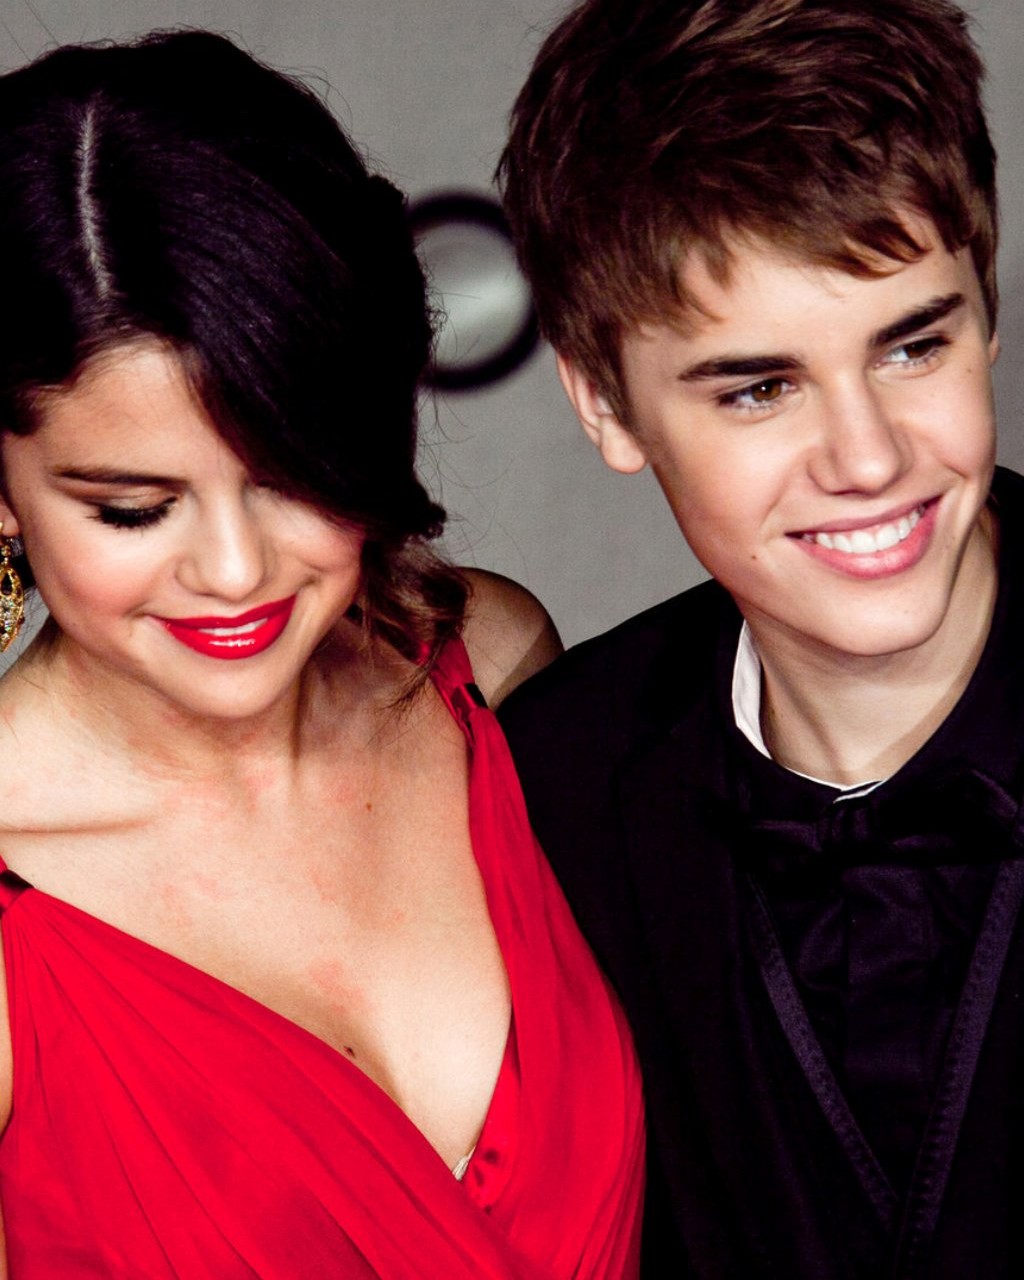 Download full size With Justin Bieber Selena Gomez wallpaper / 1024x1280